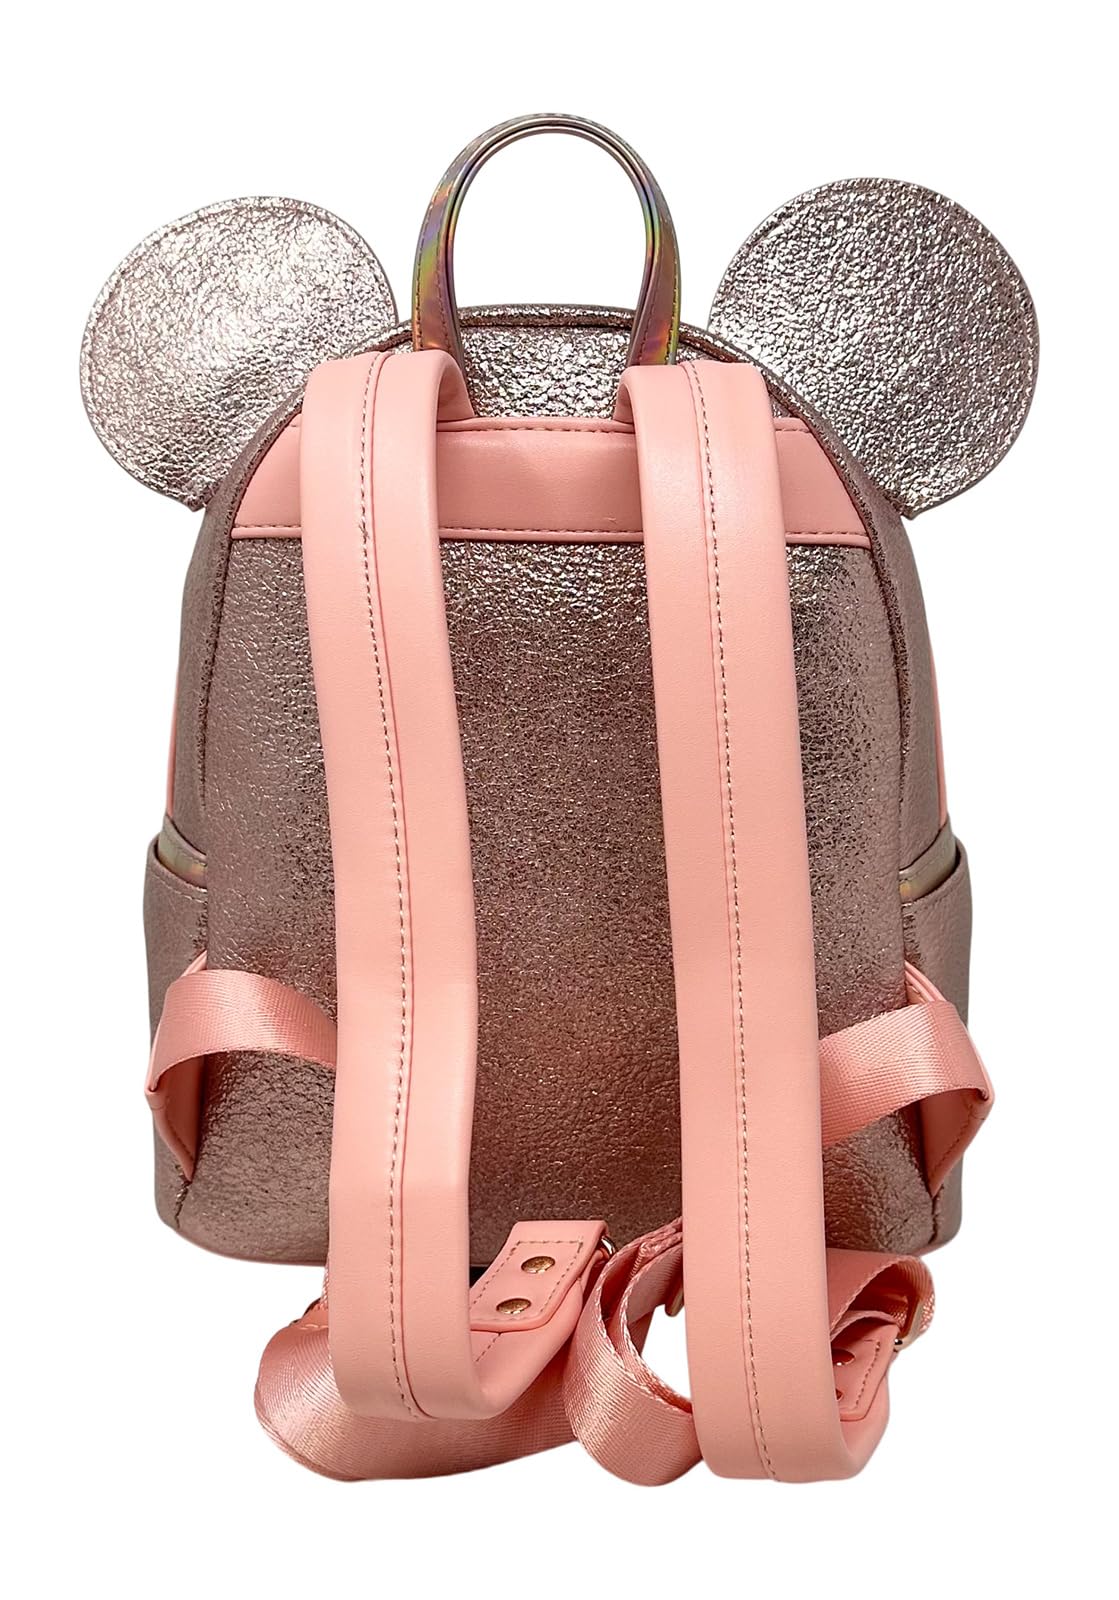 Loungefly Disney Minnie Mouse Pink Rose Metallic Womens Double Strap Shoulder Bag Purse